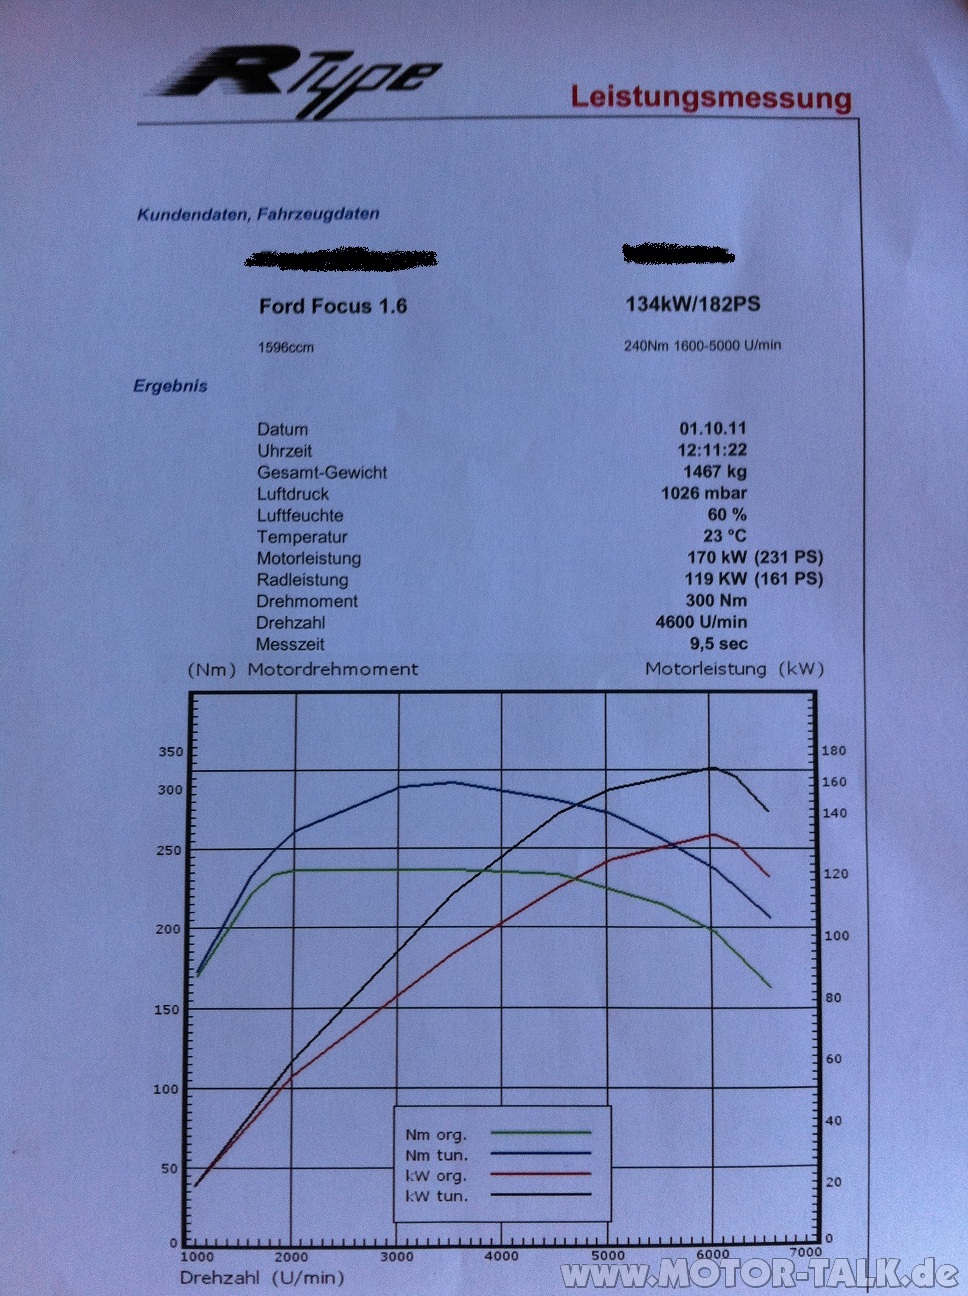 Ford ecoboost 1.6 torque curve #8